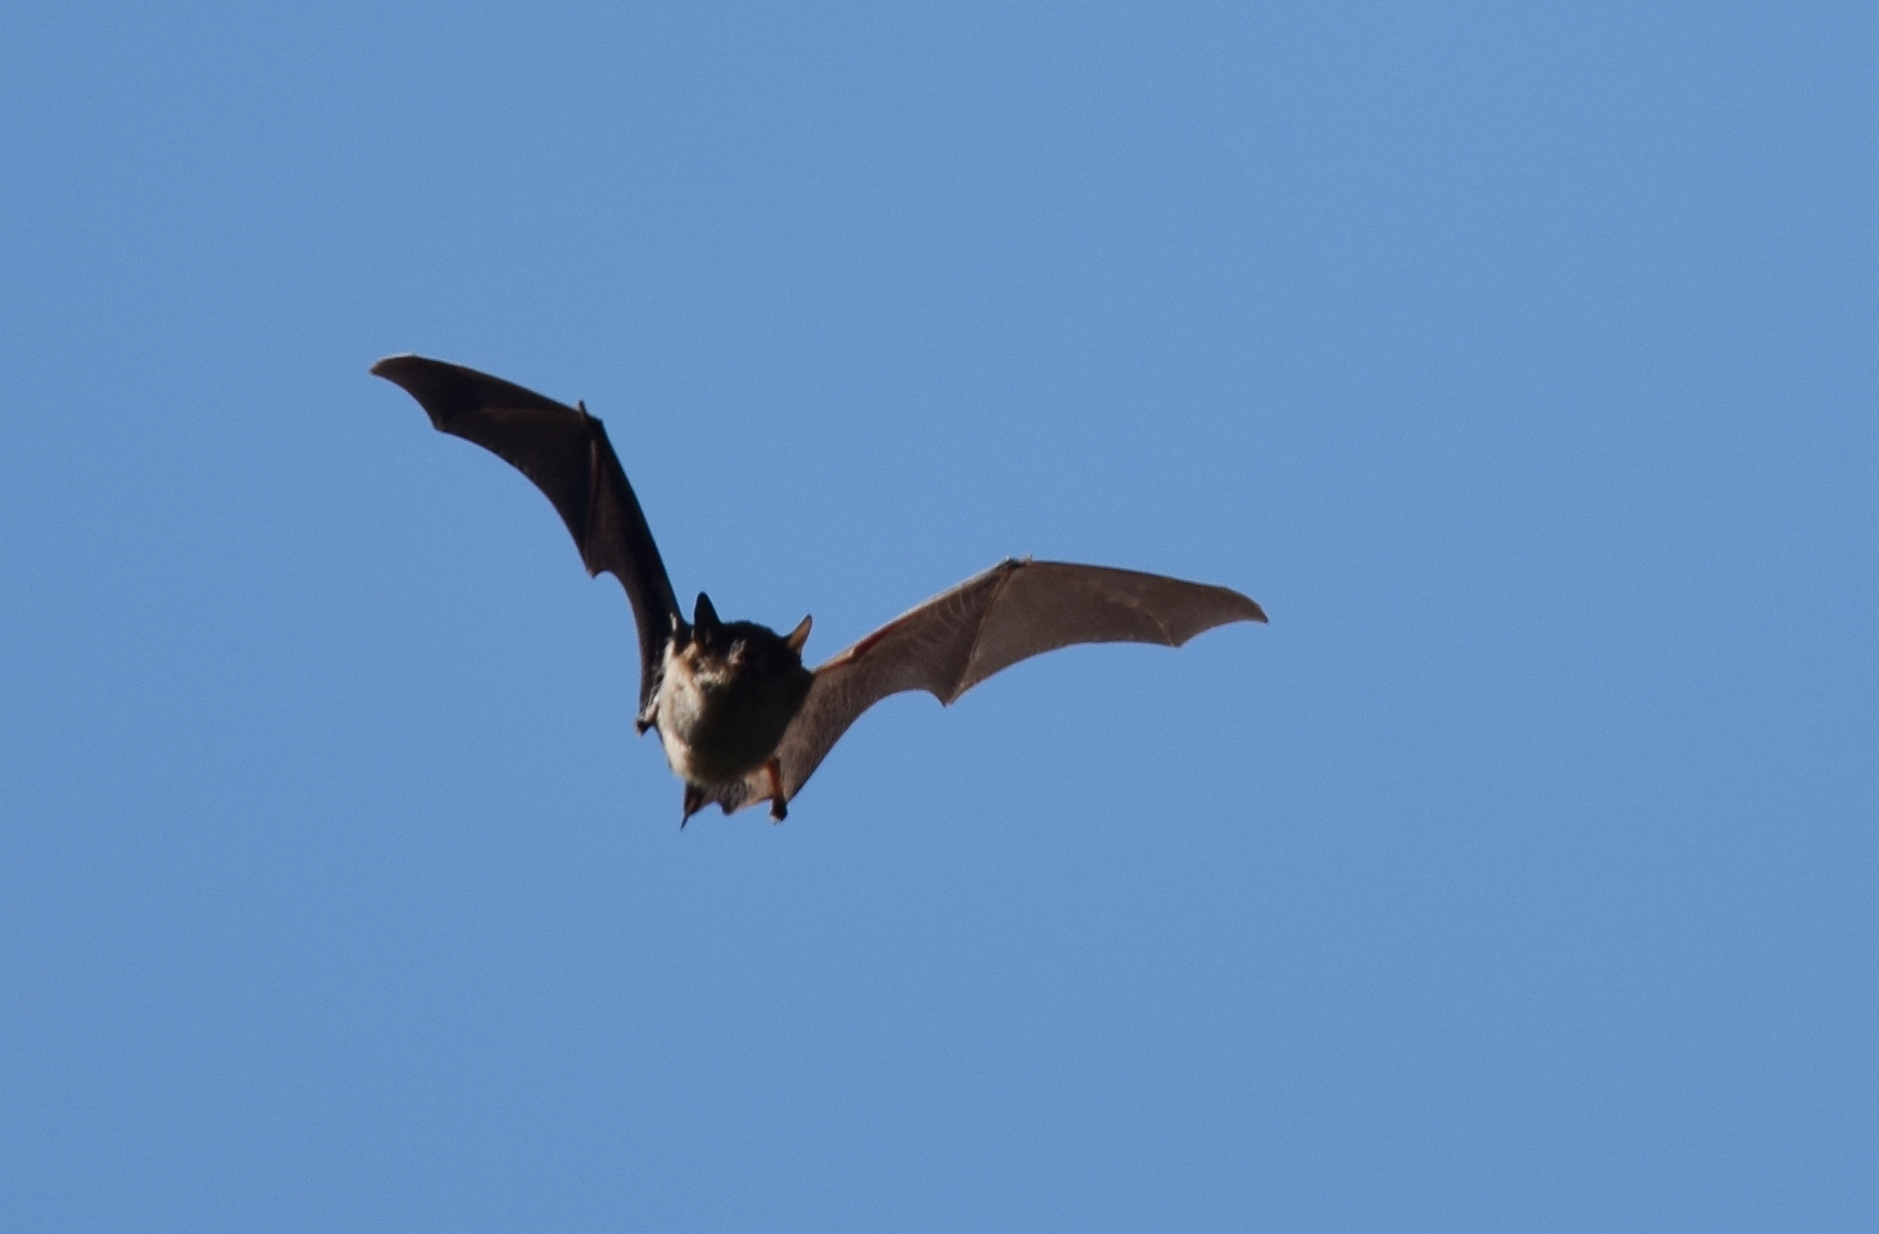 Wind Turbines Are One of the Biggest Threats to Bats